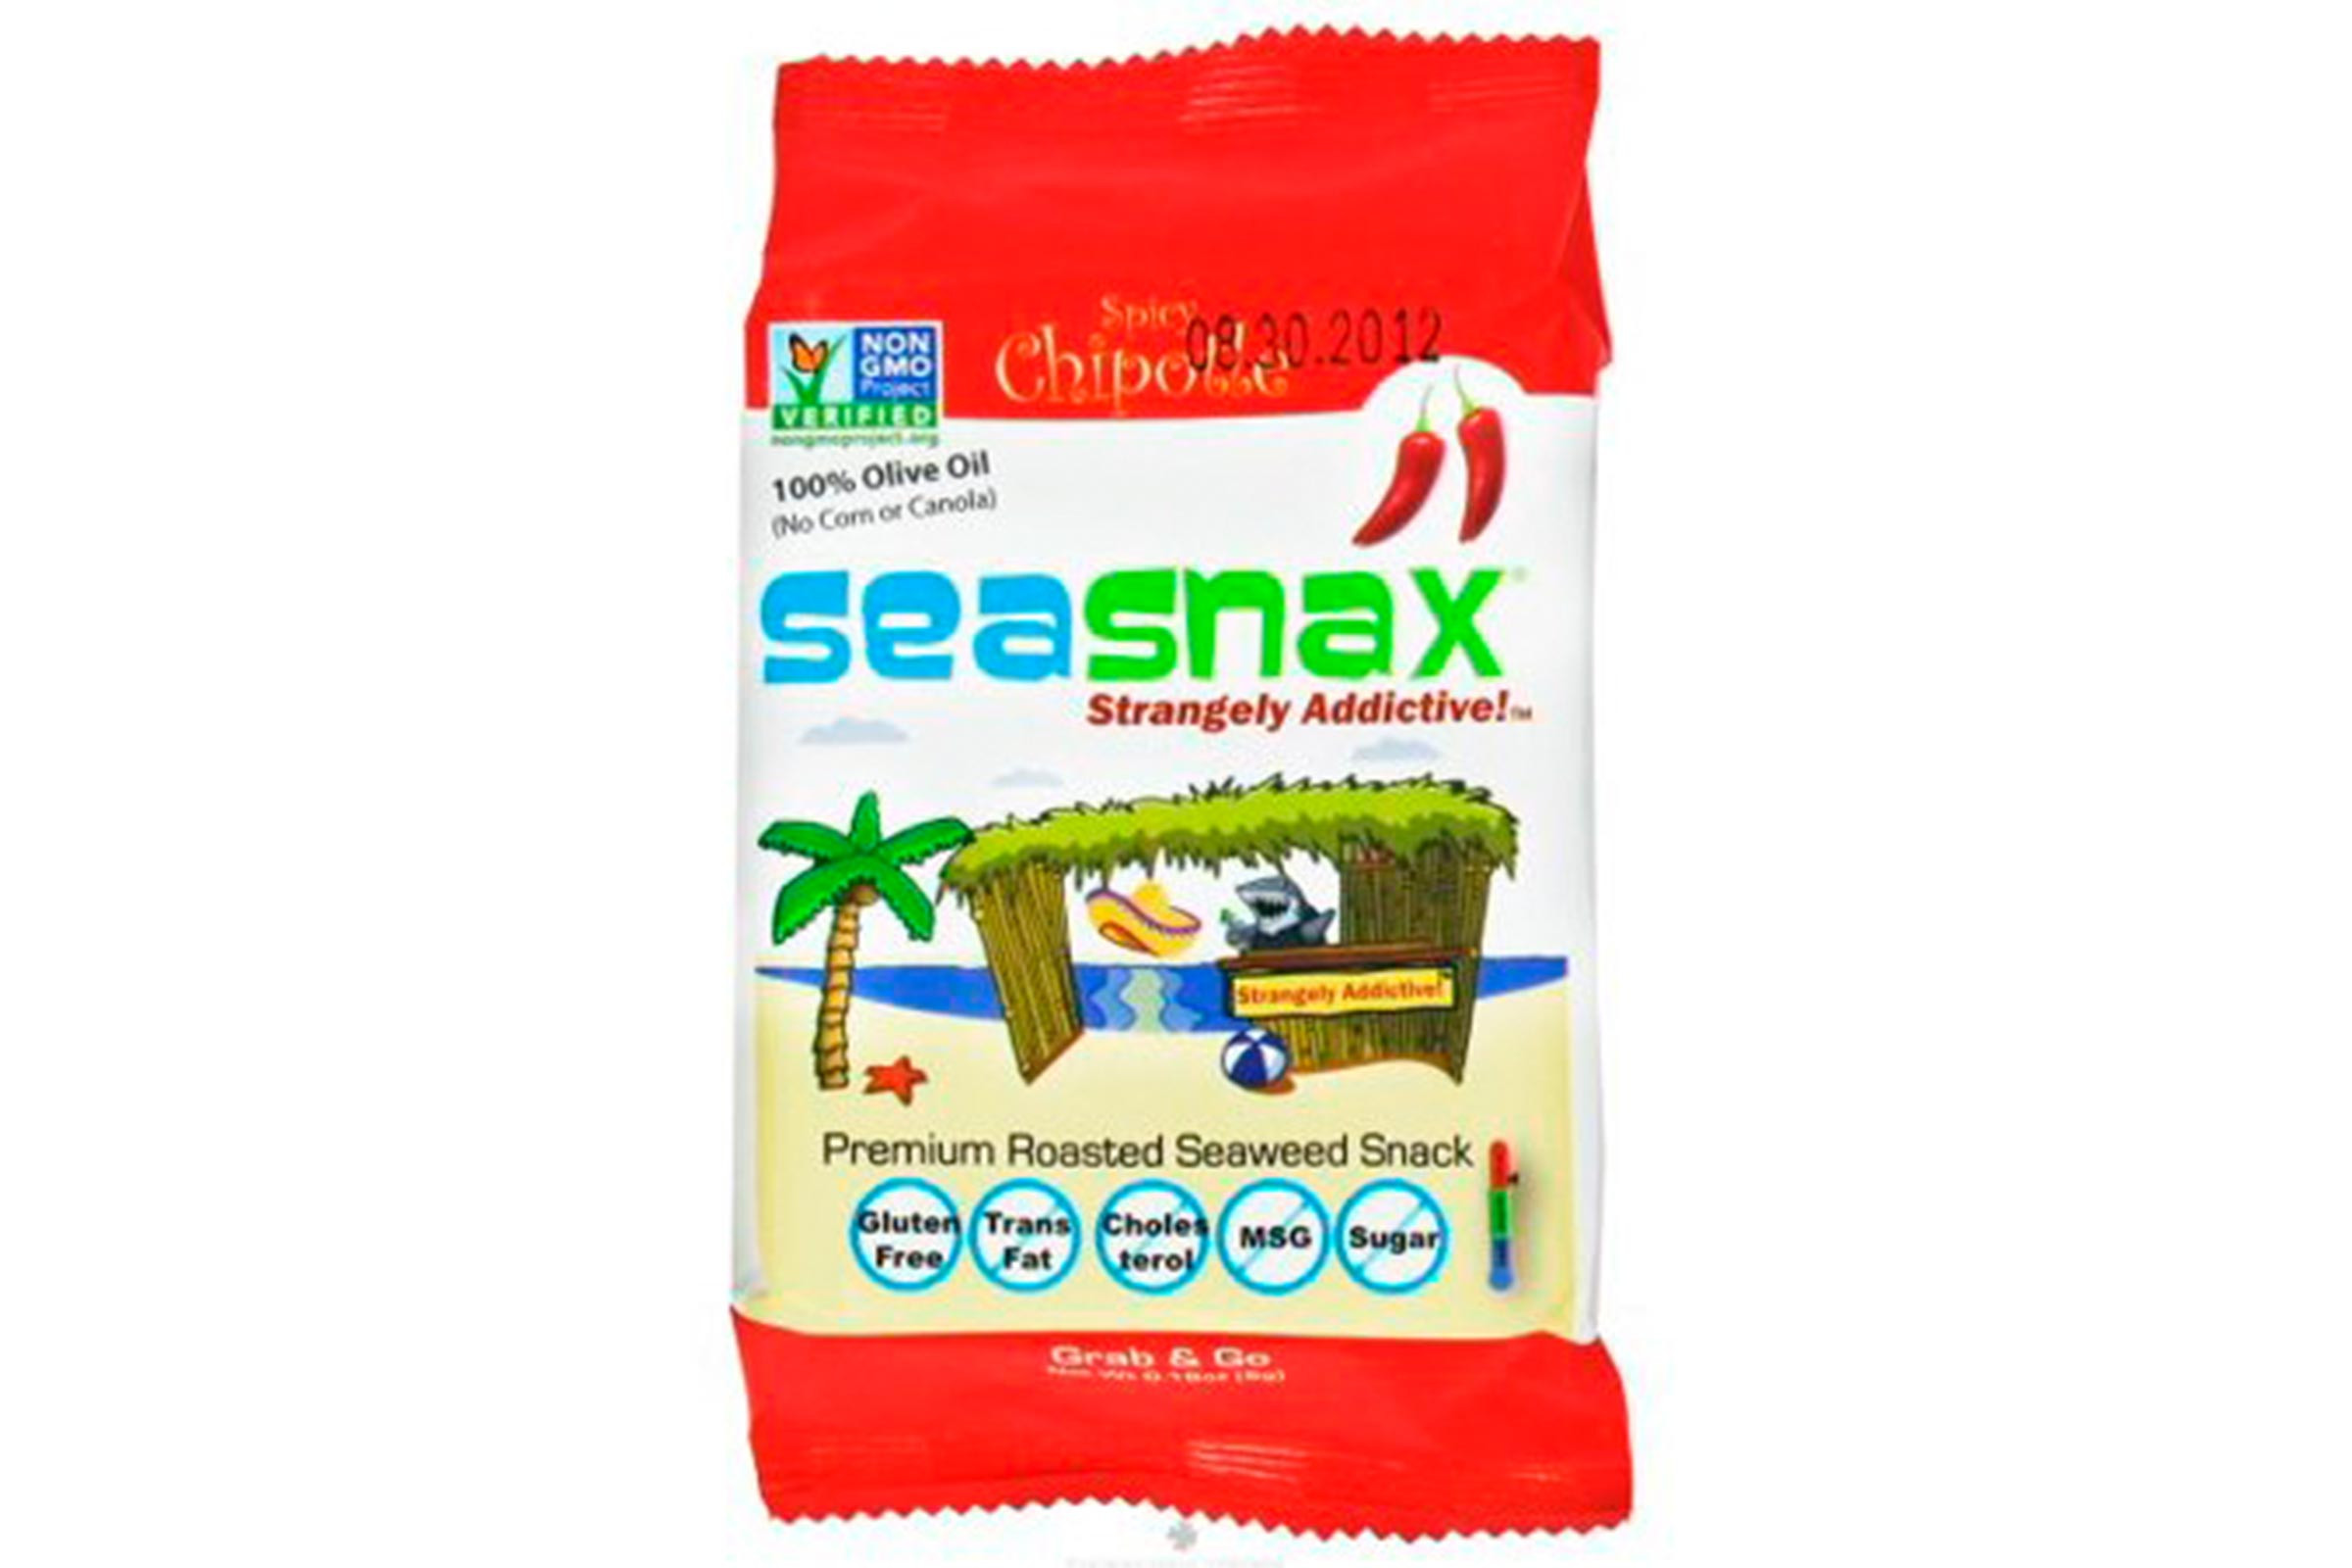 Healthy Snacks From Walmart
 The Healthiest Snacks You Can Buy at Walmart